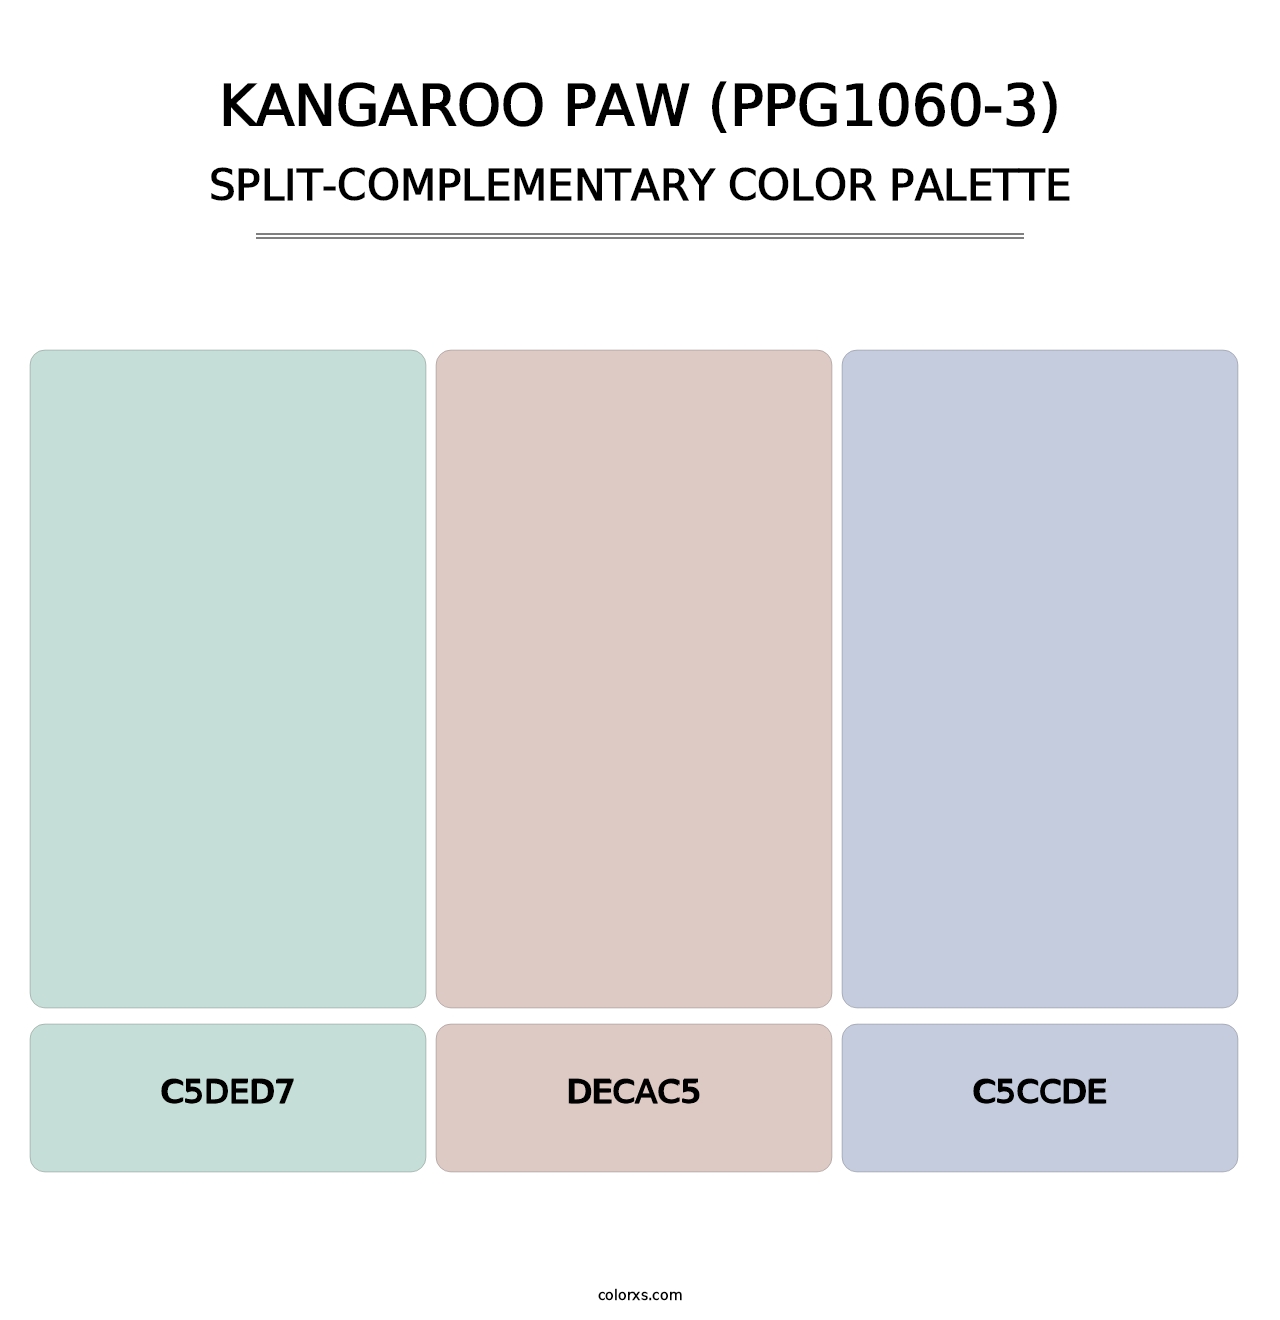 Kangaroo Paw (PPG1060-3) - Split-Complementary Color Palette